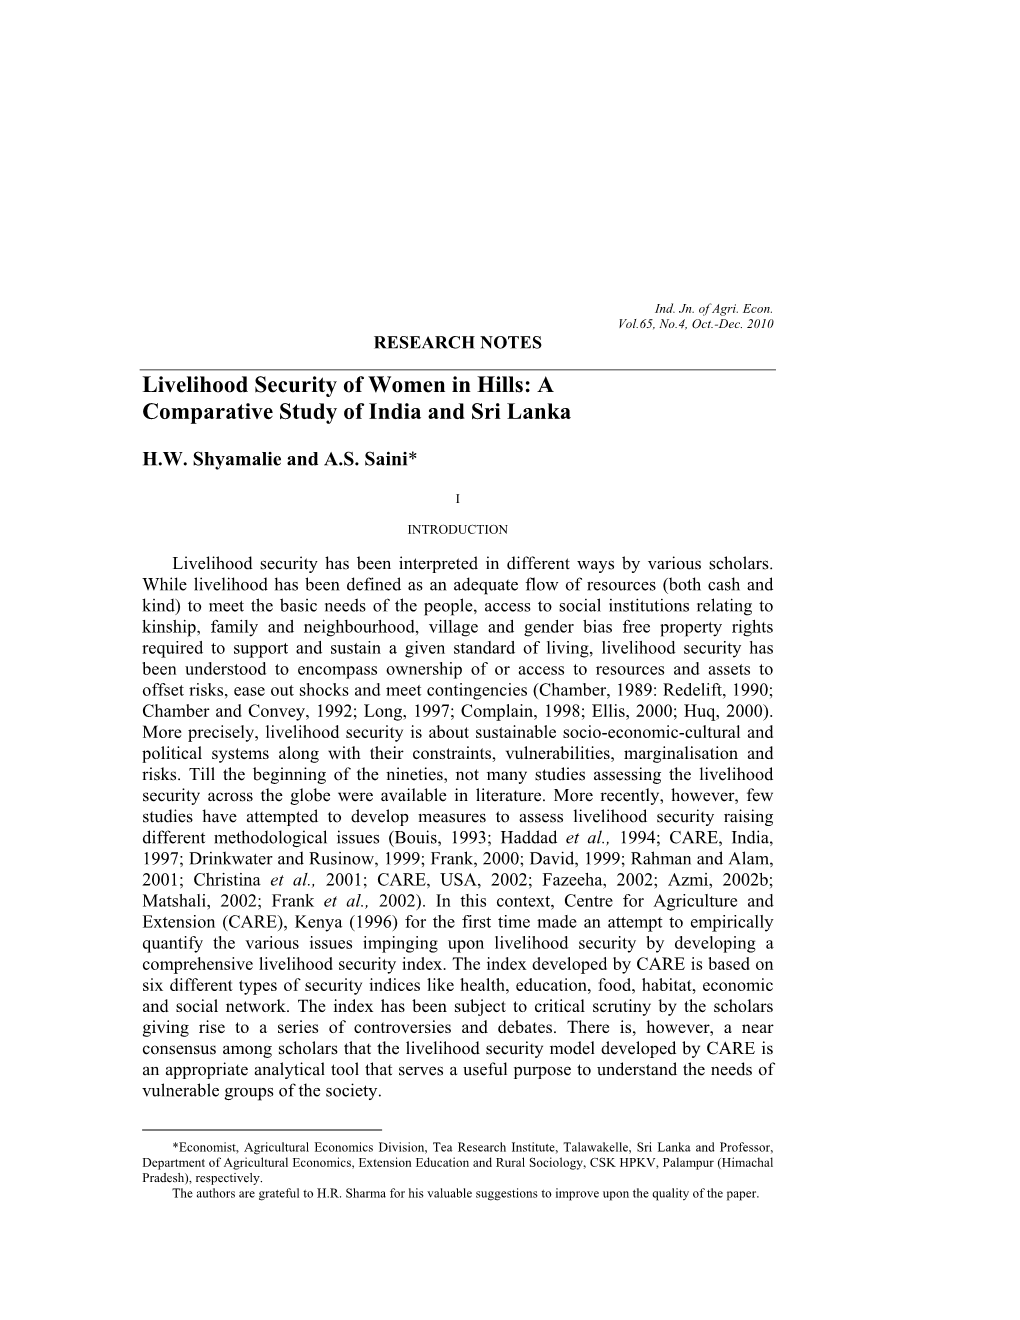 Livelihood Security of Women in Hills: a Comparative Study of India and Sri Lanka